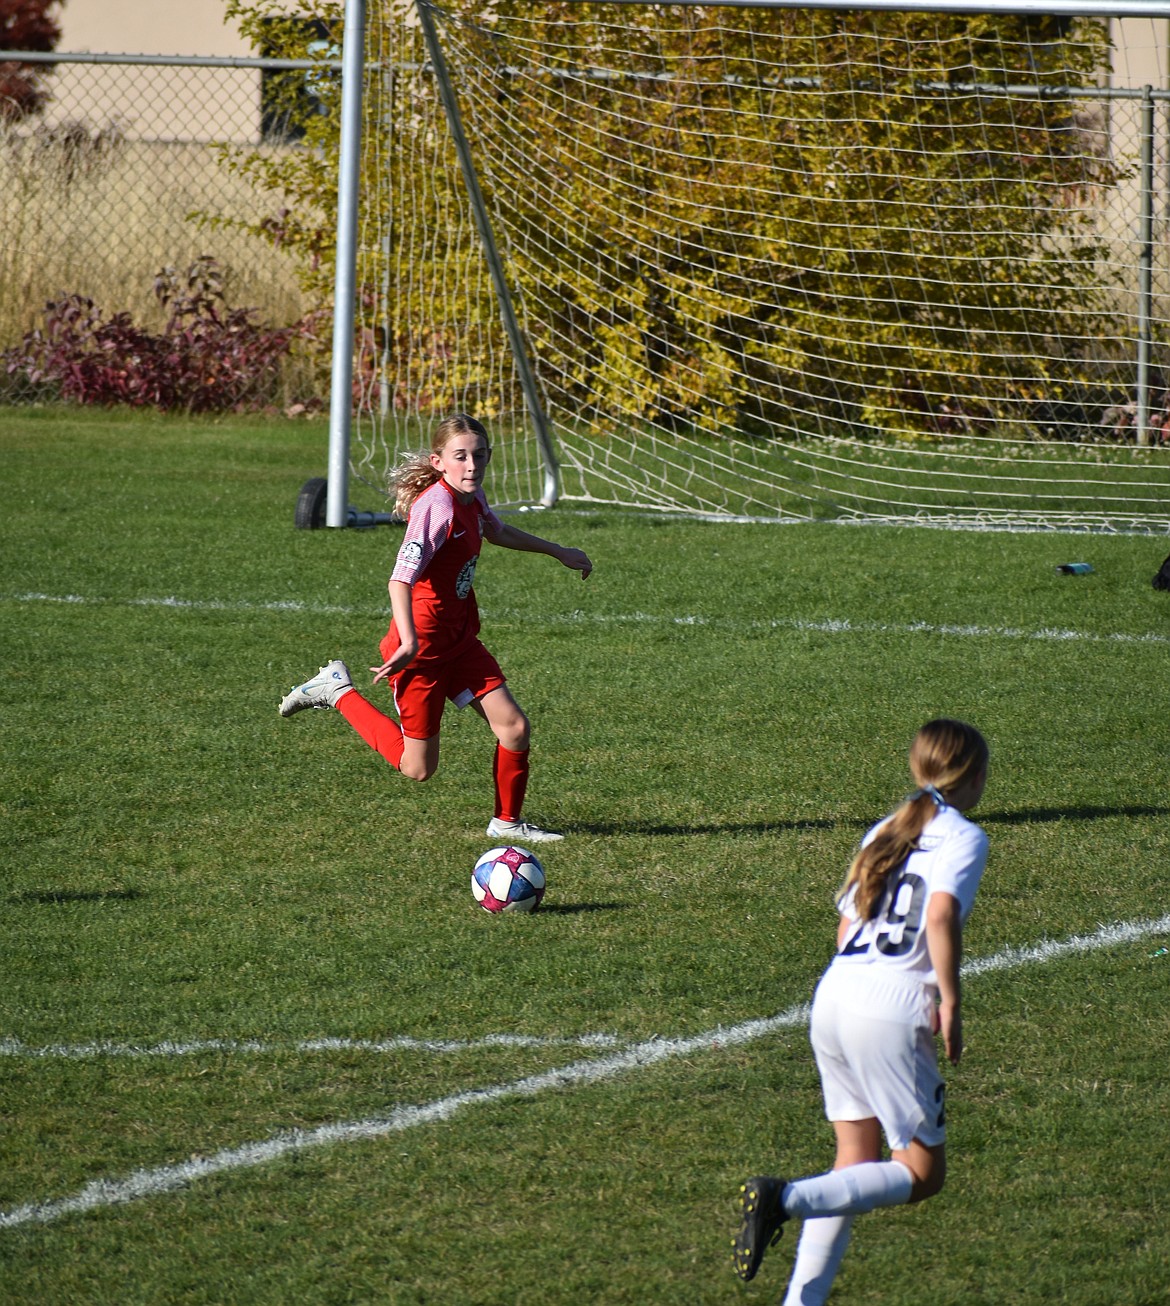 Photo by KARI HYNES
The Thorns FC North 2011 Girls Academy soccer team wrapped up its fall season last weekend with 5-1 win over Hells Canyon. Emily Hackett and Payton Brennan (pictured) each scored a goal for the Thorns and forward Presley Moreau scored 3 goals. The Thorns ended the season first in their league.